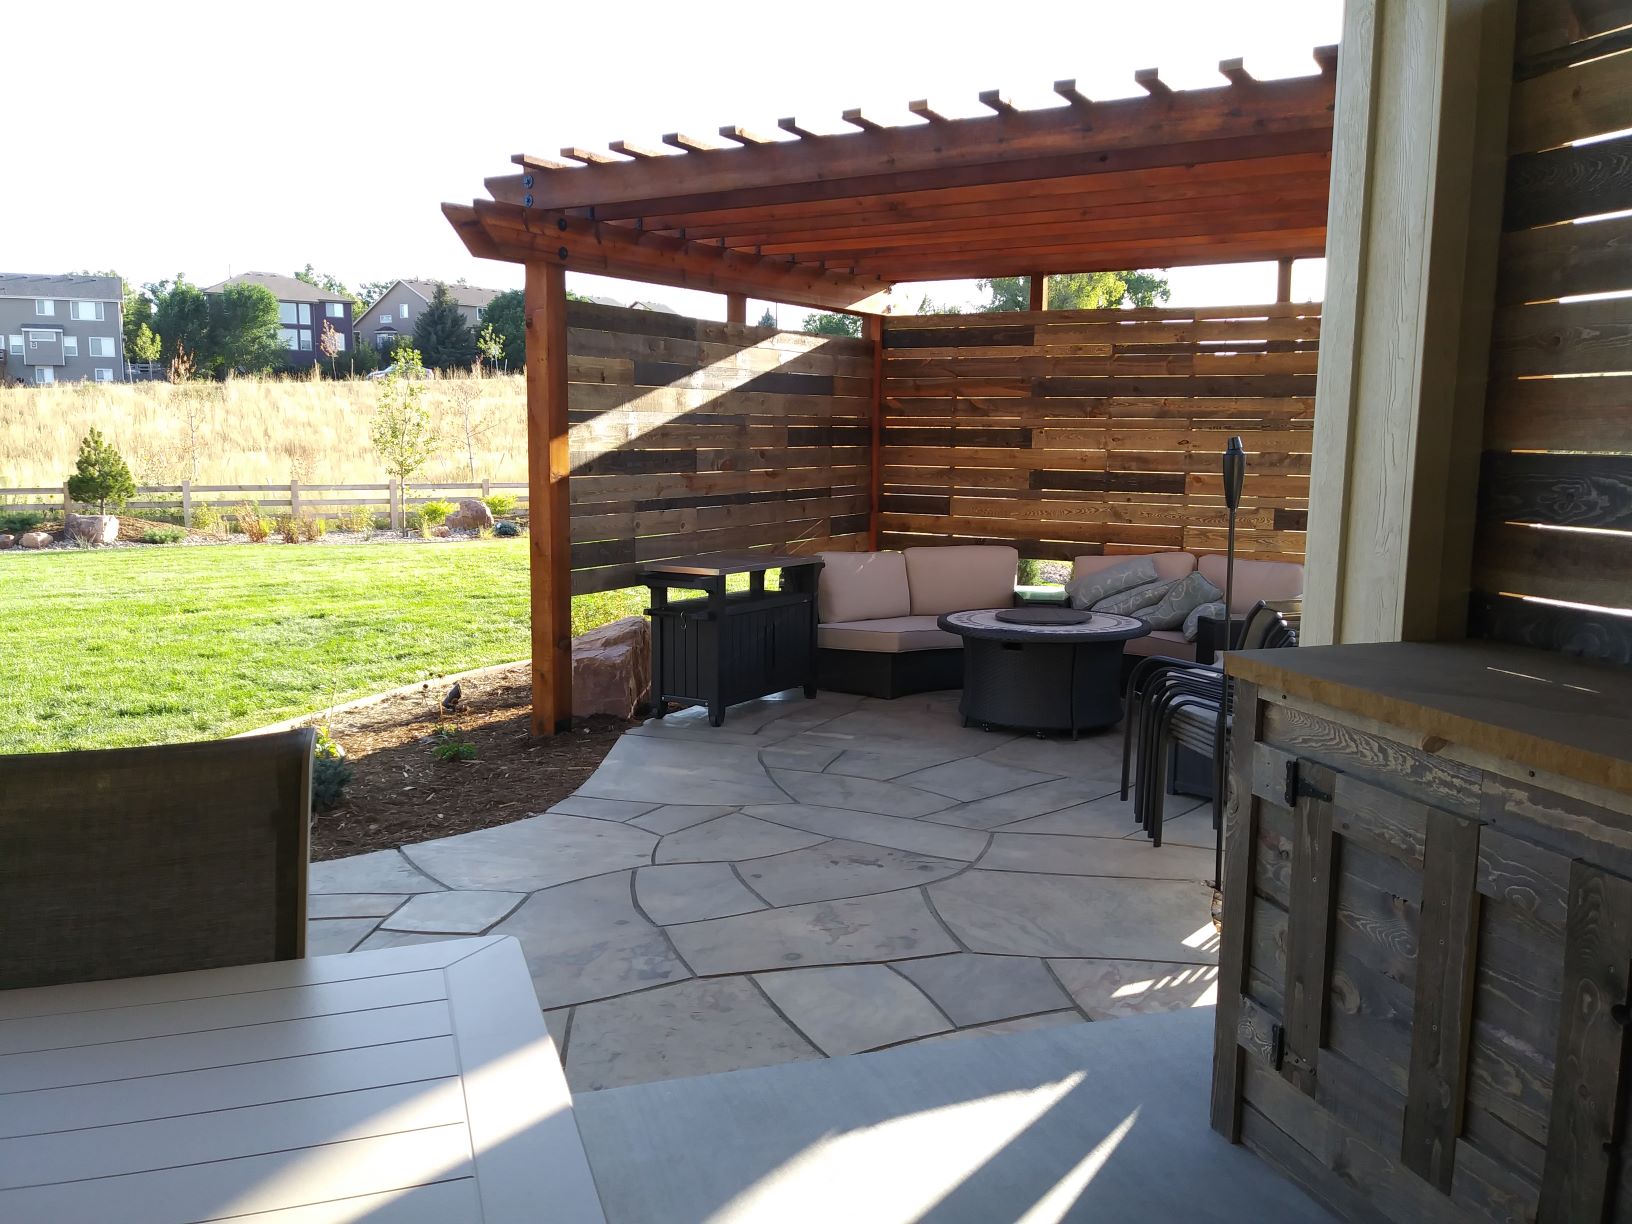 Pergola over flat stone patio with wall for privacy and wind control.